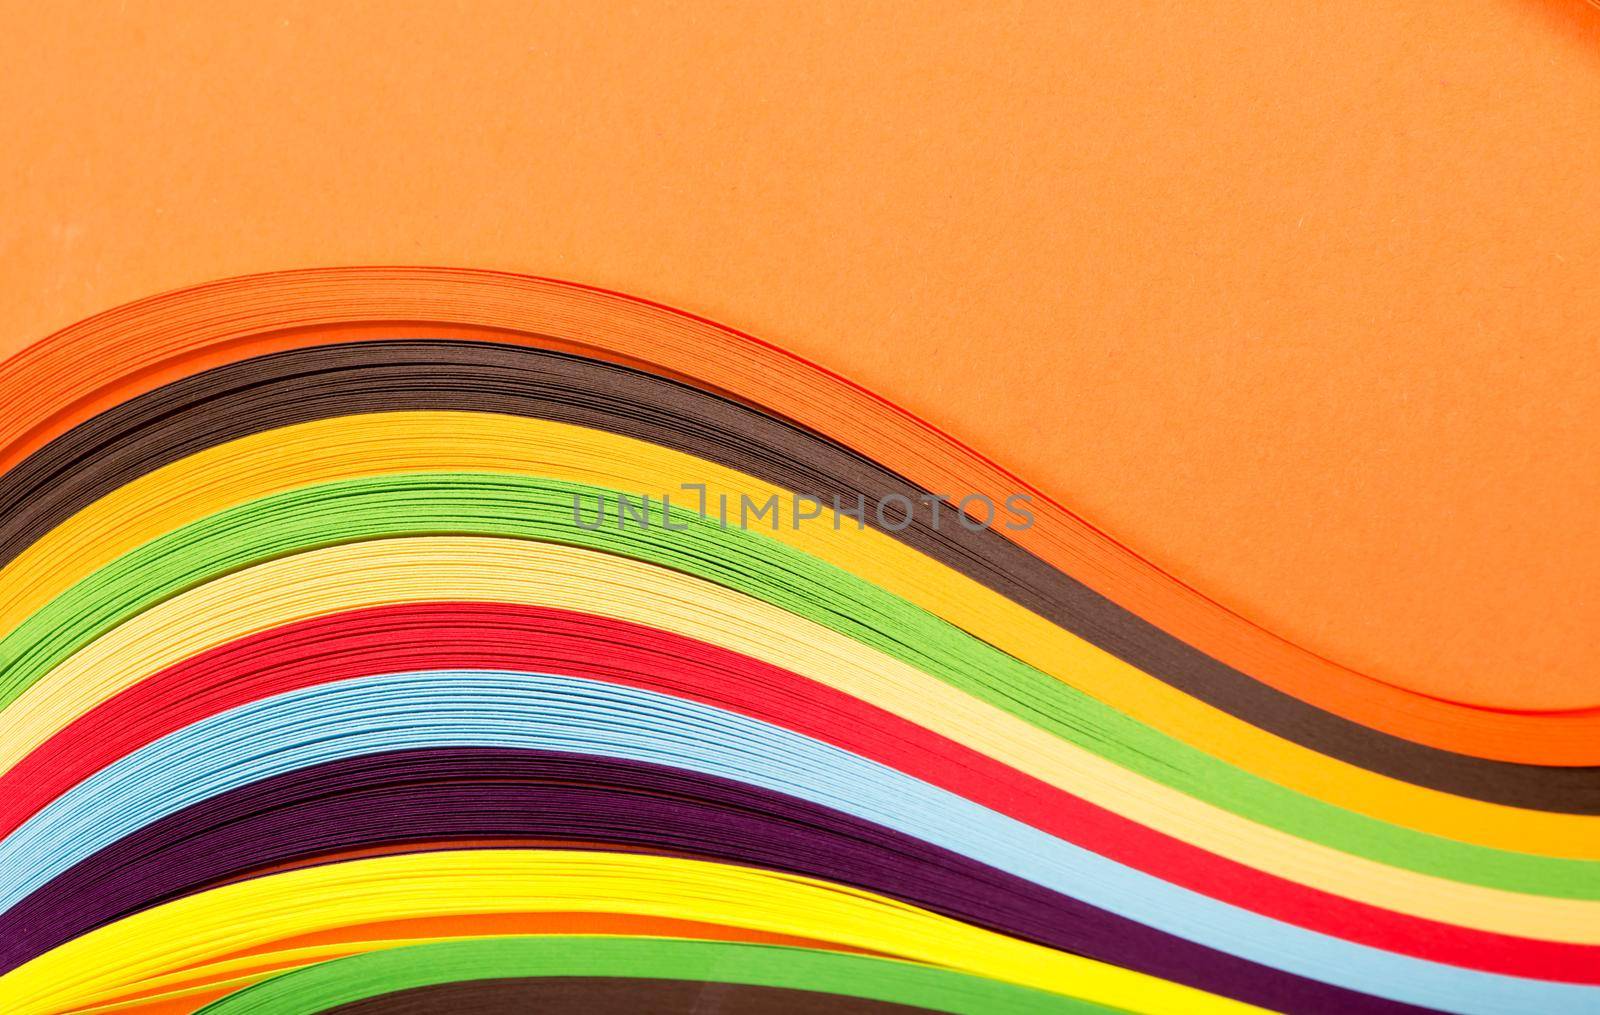 Colored paper, cross section, background stacked in wedges